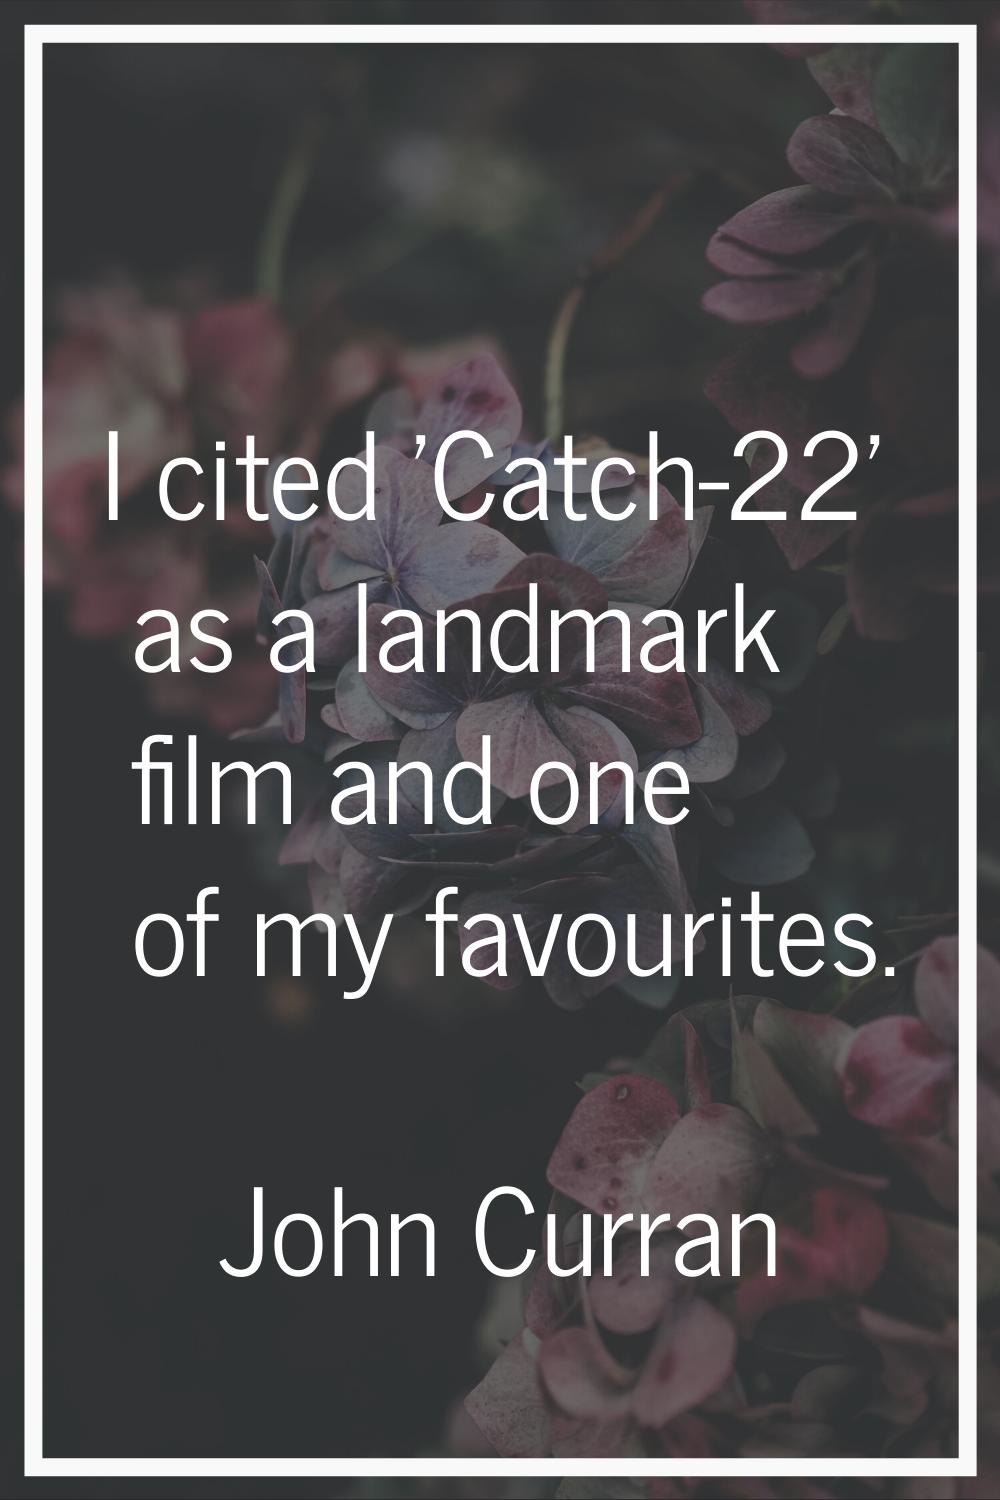 I cited 'Catch-22' as a landmark film and one of my favourites.